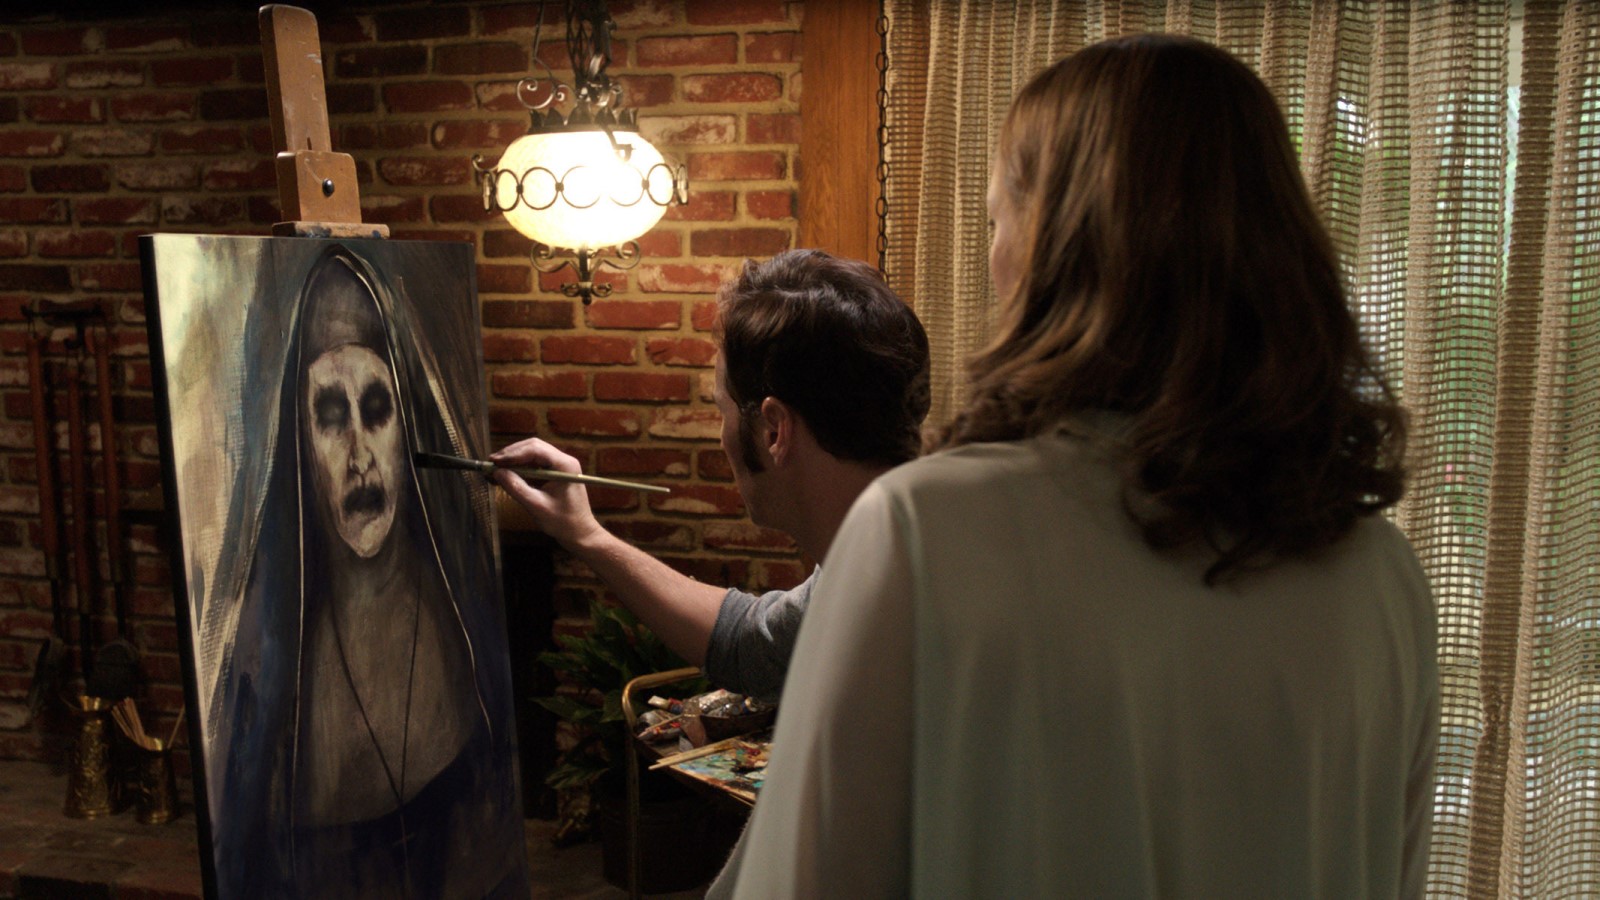 The Conjuring' Movies in Order: Watch Chronologically or By Date